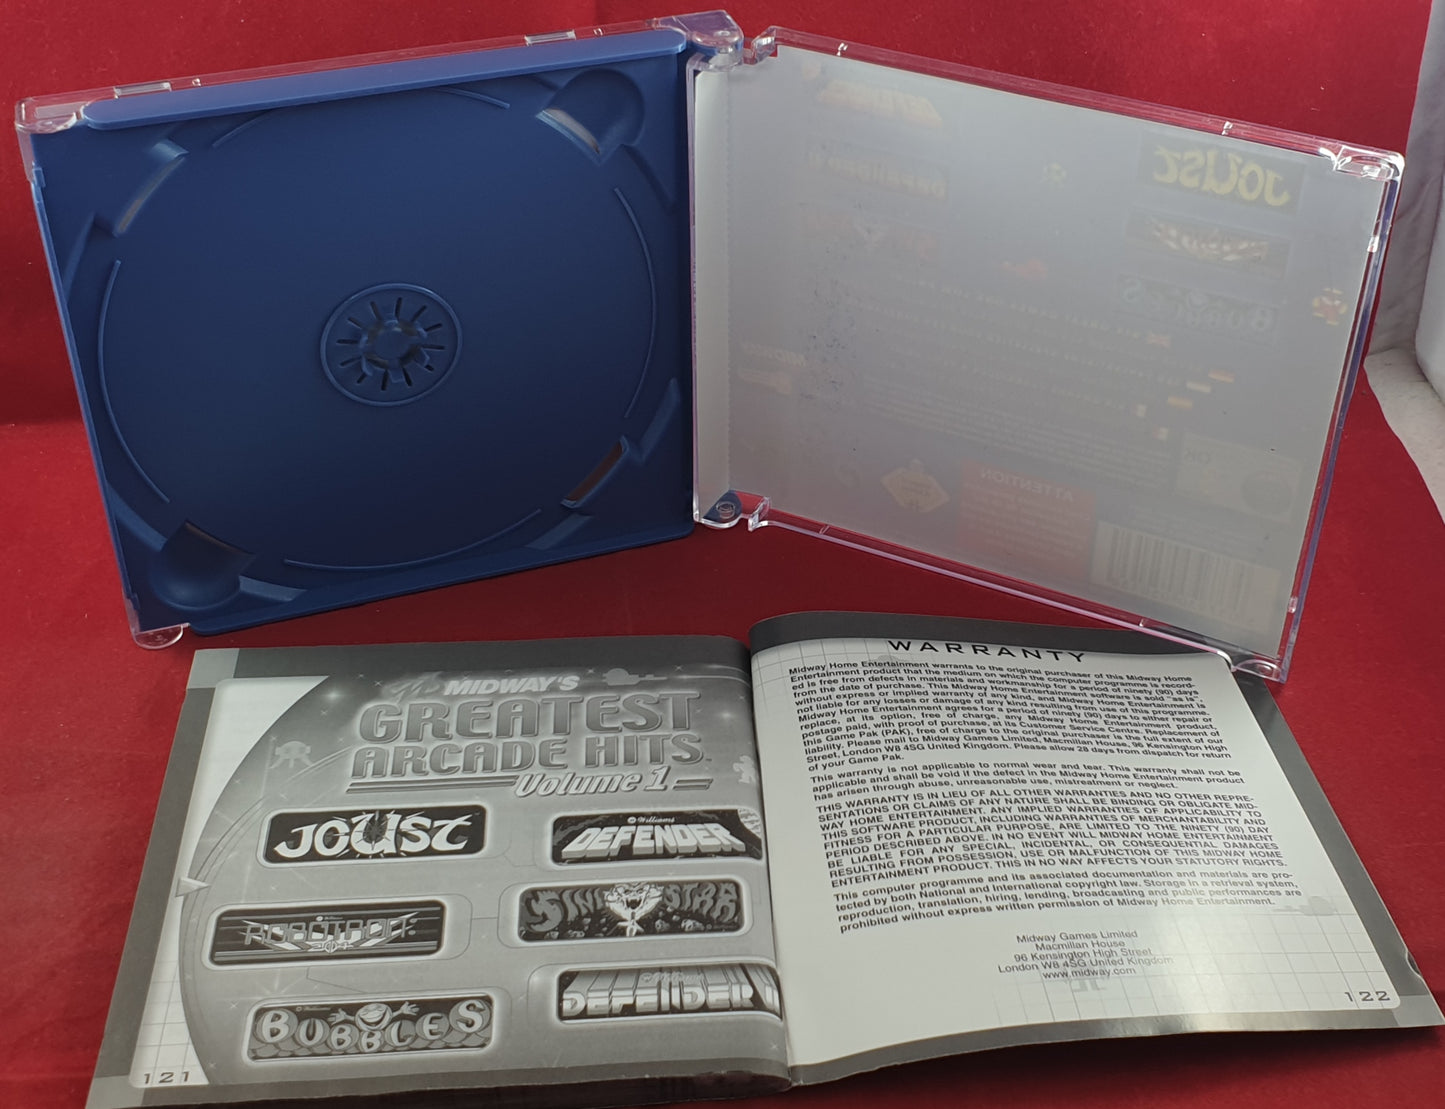 Midway's Greatest Arcade Hits Volume 1 Sega Dreamcast Game